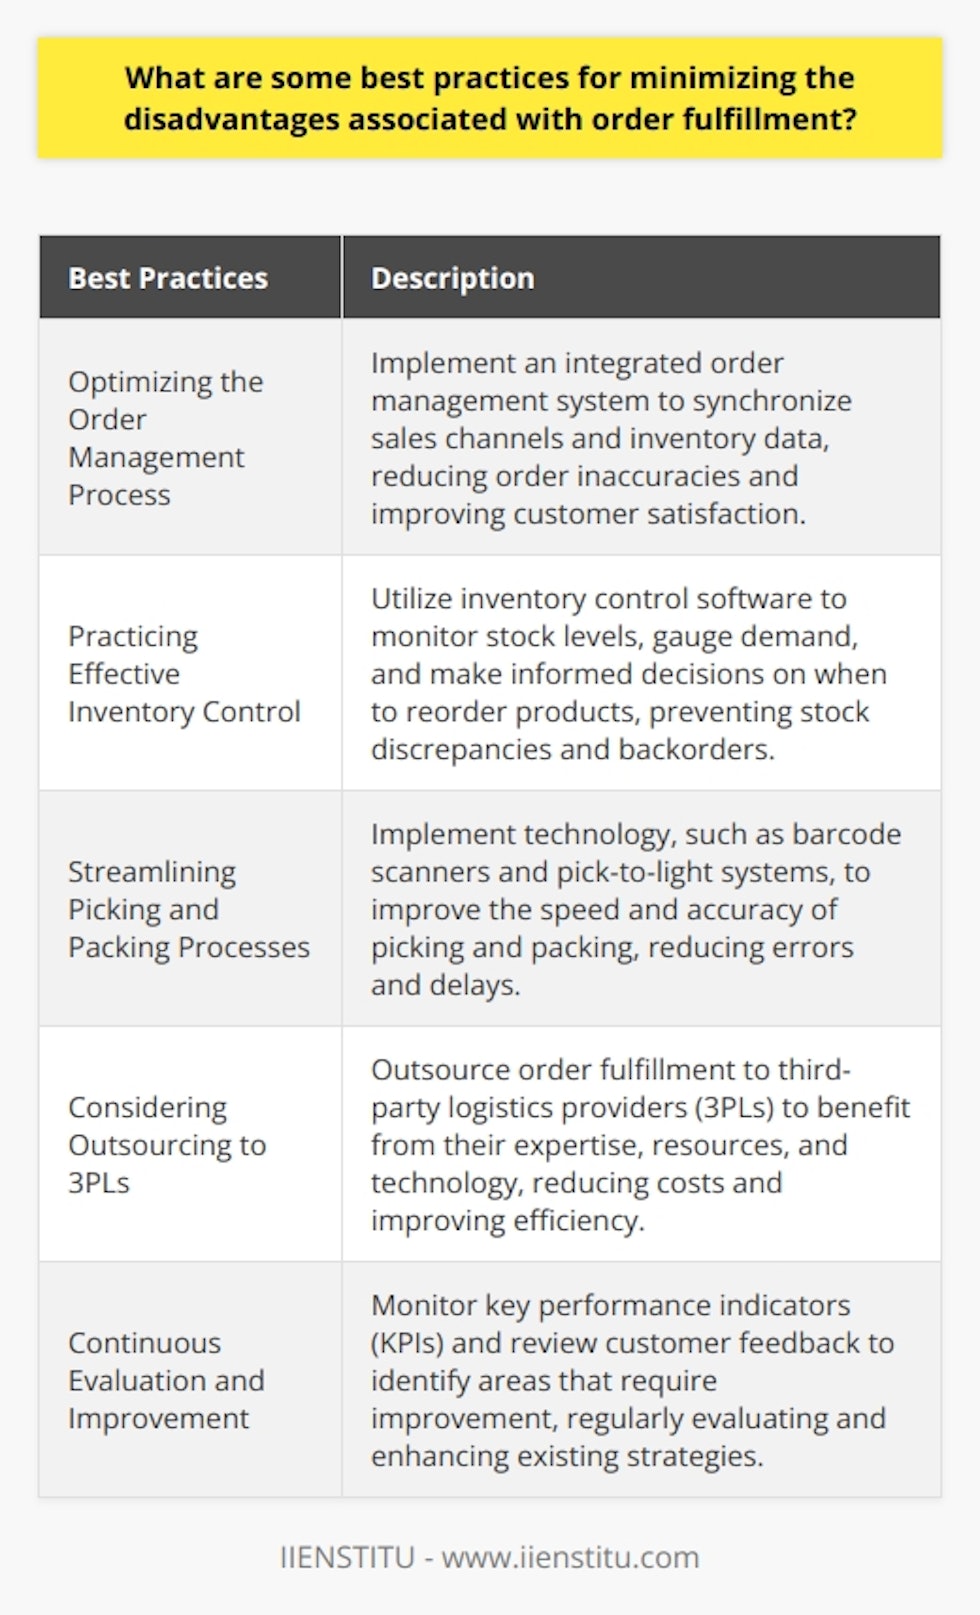 Order fulfillment is a critical aspect of running a business, as it directly impacts customer satisfaction and overall profitability. While there are challenges associated with order fulfillment, implementing best practices can help minimize its disadvantages. In this article, we will discuss some of these best practices in detail.One of the most important best practices for minimizing the disadvantages associated with order fulfillment is optimizing the order management process. By implementing an integrated order management system, businesses can ensure that all sales channels and inventory data are in sync. This reduces the risk of order inaccuracies and helps improve customer satisfaction. For instance, with an integrated system, businesses can avoid overselling and stockouts, which can negatively impact their reputation. By optimizing the order management process, businesses can enhance efficiency and provide a seamless order fulfillment experience for their customers.Another critical aspect of minimizing order fulfillment disadvantages is practicing effective inventory control. Accurate inventory management is crucial as it prevents stock discrepancies and backorders, which can result in dissatisfied customers and lost sales. To achieve effective inventory control, businesses can leverage inventory control software. This software enables businesses to monitor their stock levels, gauge demand, and make informed decisions on when to reorder products. By maintaining optimal inventory levels, businesses can ensure timely order fulfillment and customer satisfaction.Efficient picking and packing processes also play a vital role in minimizing the disadvantages associated with order fulfillment. A streamlined picking and packing process ensures that the right items are picked from the warehouse and accurately packaged for delivery. Technology can be leveraged to enhance these processes further. For example, barcode scanners and pick-to-light systems can improve the speed and accuracy of picking and packing, reducing errors and delays. By implementing such technologies, businesses can improve the efficiency of their order fulfillment operations.In cases where businesses struggle with in-house order fulfillment, outsourcing to a third-party logistics provider (3PL) can be an effective solution. 3PLs specialize in managing the entire order fulfillment process, including inventory management, picking and packing, and shipping. By outsourcing order fulfillment to a 3PL, businesses can benefit from their expertise, resources, and technology. This not only reduces costs but also minimizes errors and improves overall efficiency.Continuous evaluation and improvement are essential when it comes to minimizing the disadvantages associated with order fulfillment. Monitoring key performance indicators (KPIs) and reviewing customer feedback can provide valuable insights into areas that require improvement. By identifying areas of weakness, businesses can implement targeted strategies for enhancement. Regularly evaluating and improving upon existing strategies ensures that businesses adapt to changing customer expectations and market conditions. By constantly striving for improvement, businesses can achieve a more efficient and satisfactory order fulfillment experience for their customers.In conclusion, minimizing the disadvantages associated with order fulfillment requires businesses to implement best practices such as optimizing the order management process, practicing effective inventory control, streamlining picking and packing procedures, considering outsourcing to 3PLs, and continuously evaluating and improving existing strategies. By embracing these best practices, businesses can ensure an efficient order fulfillment process that results in satisfied customers and increased sales.